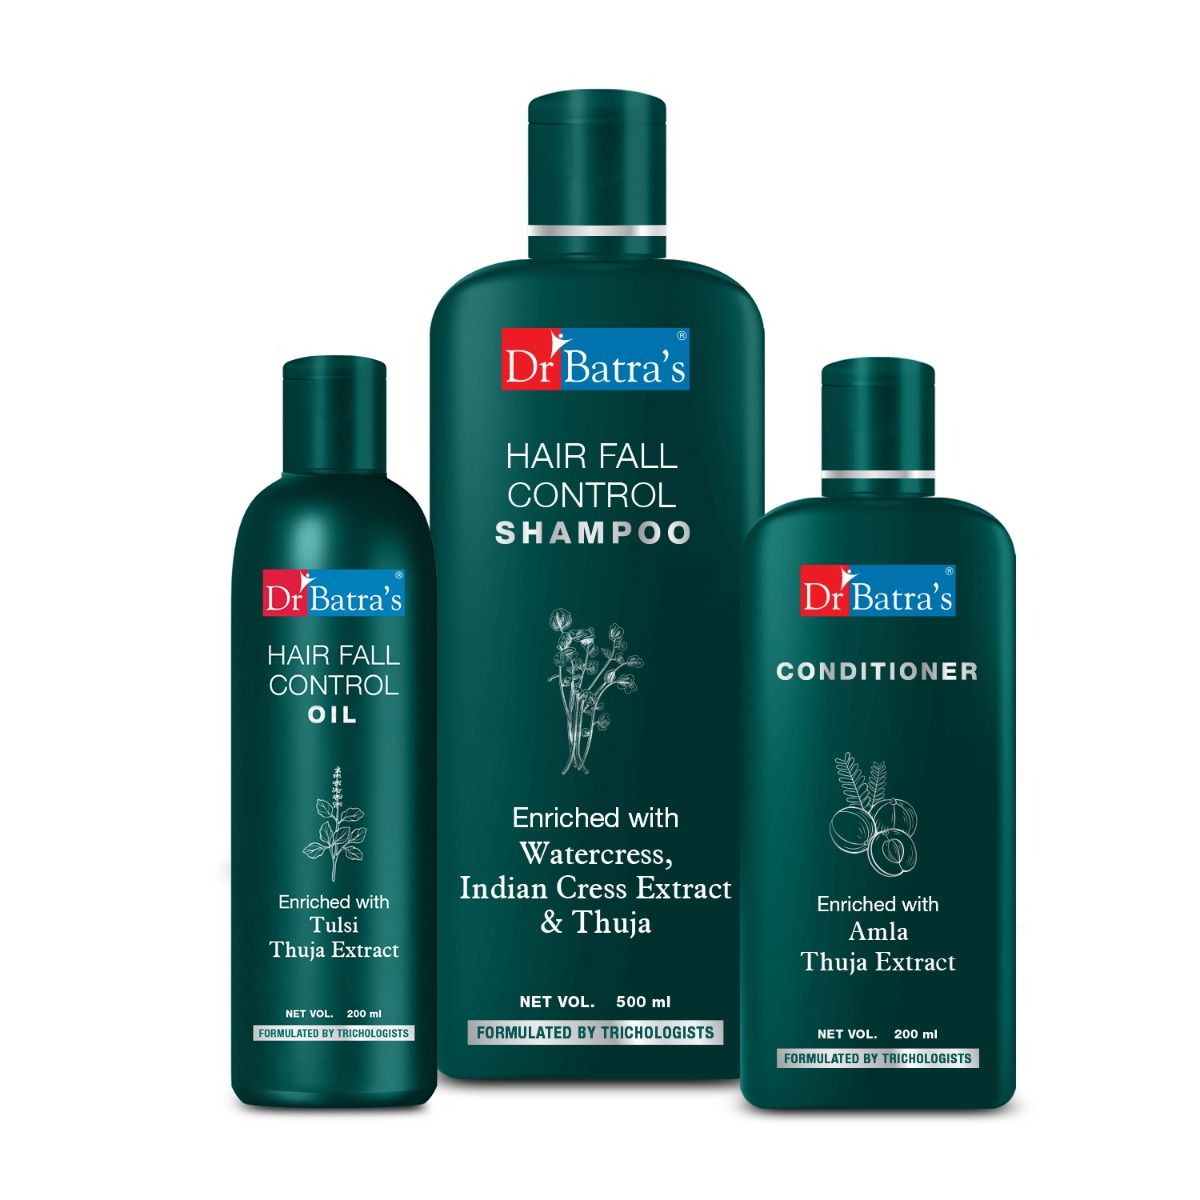     			Dr Batra's Hair Fall Control Shampoo 500 ml Conditioner 200 ml and Hair Fall Control Oil 200 ml (Pack of 3 Men and Women)